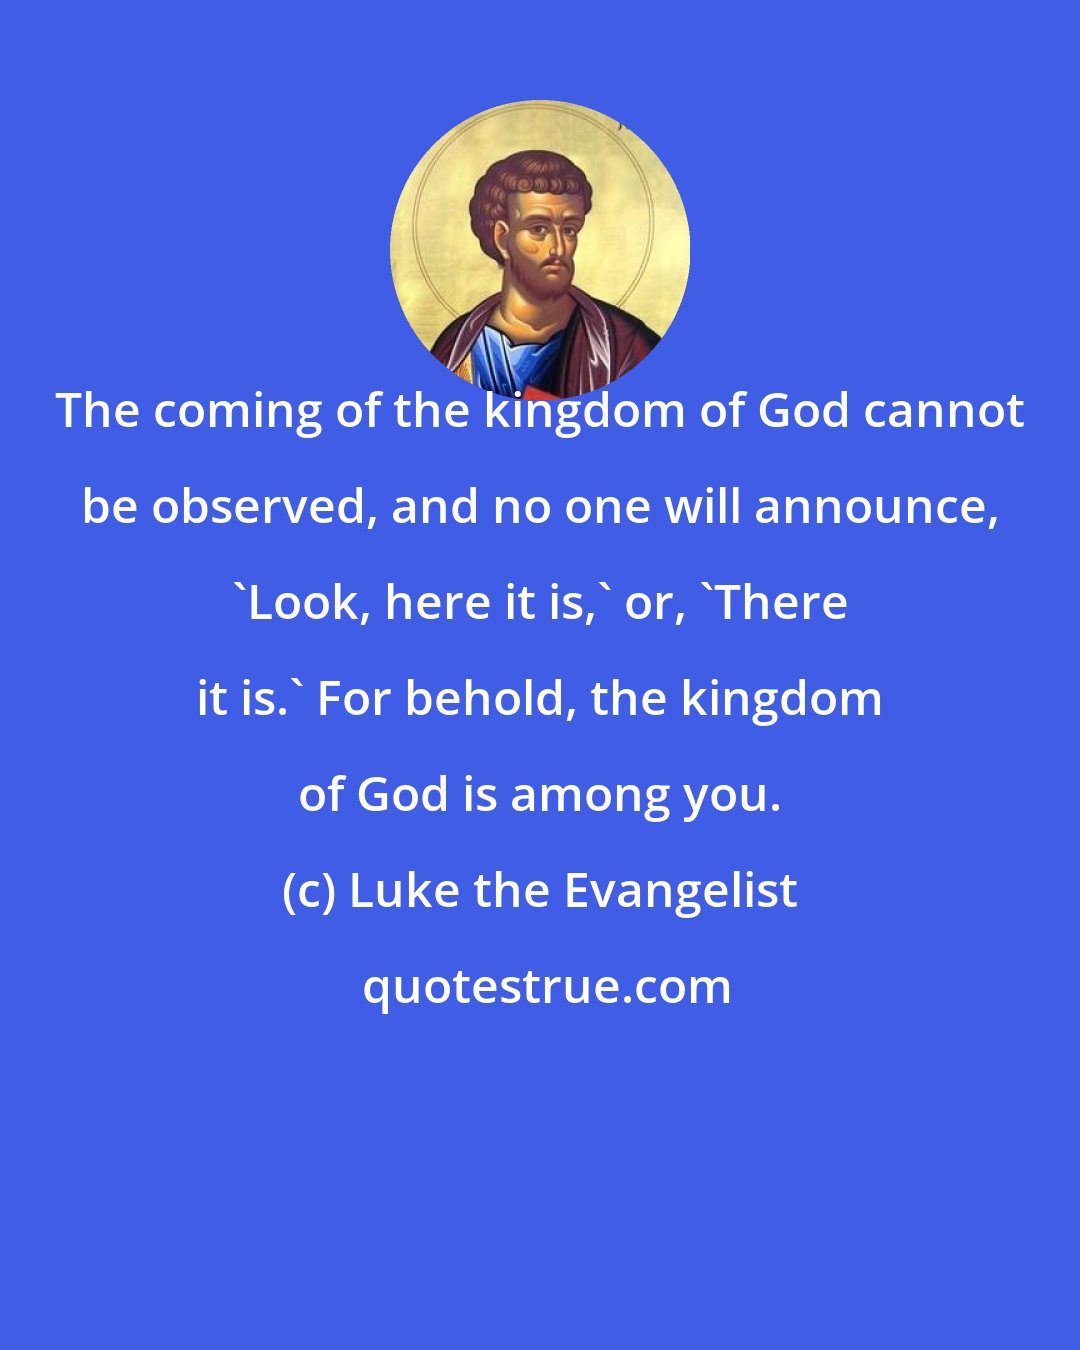 Luke the Evangelist: The coming of the kingdom of God cannot be observed, and no one will announce, 'Look, here it is,' or, 'There it is.' For behold, the kingdom of God is among you.